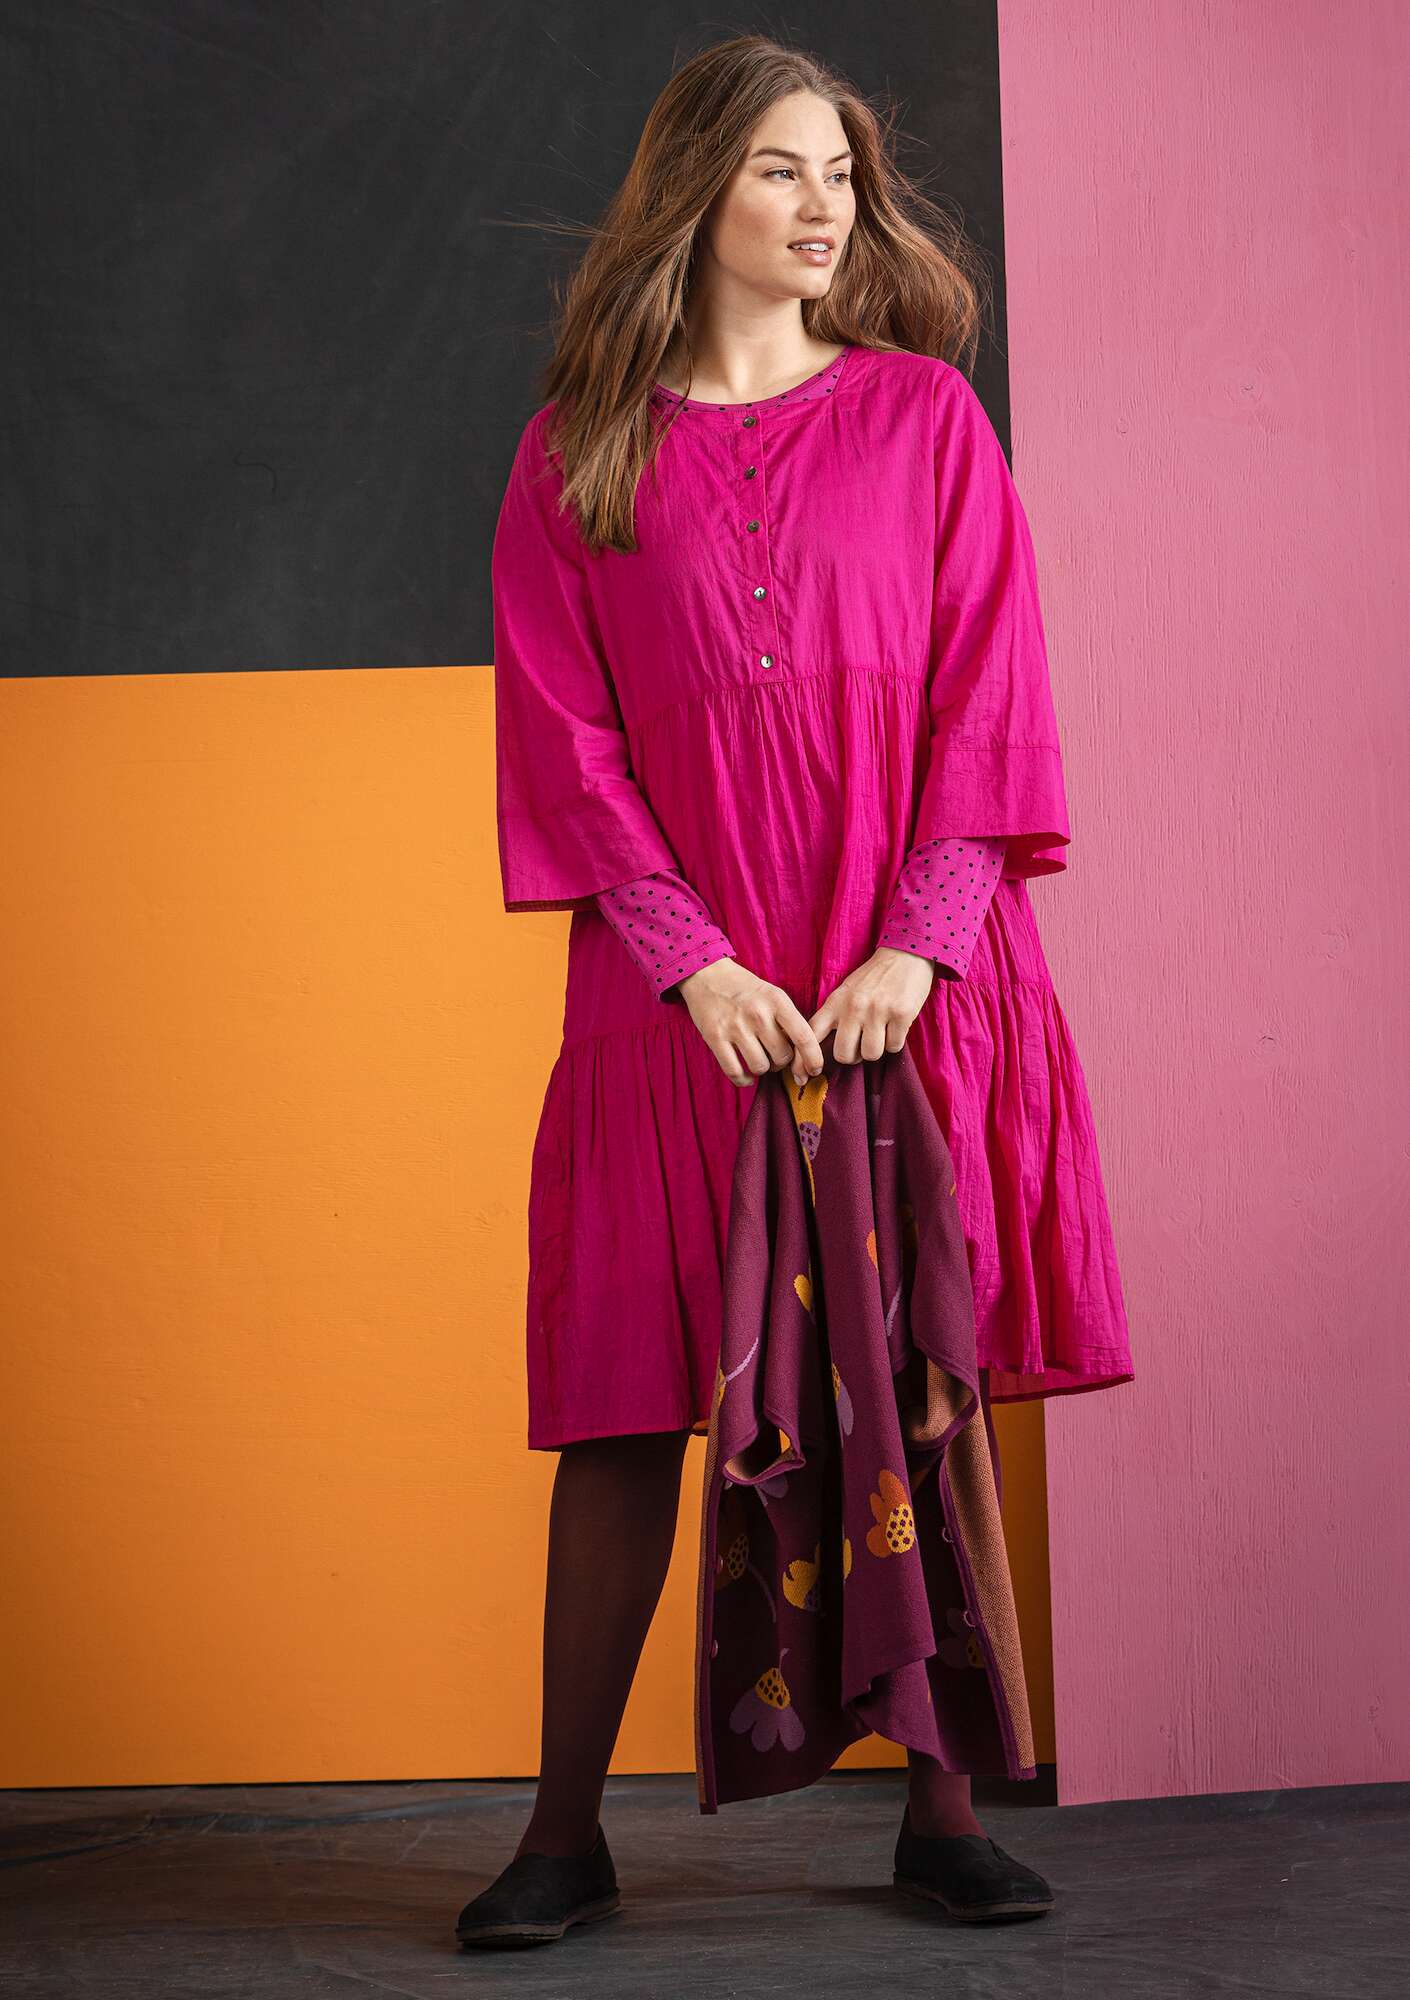 “Fruits” dress in woven organic/recycled cotton cochineal